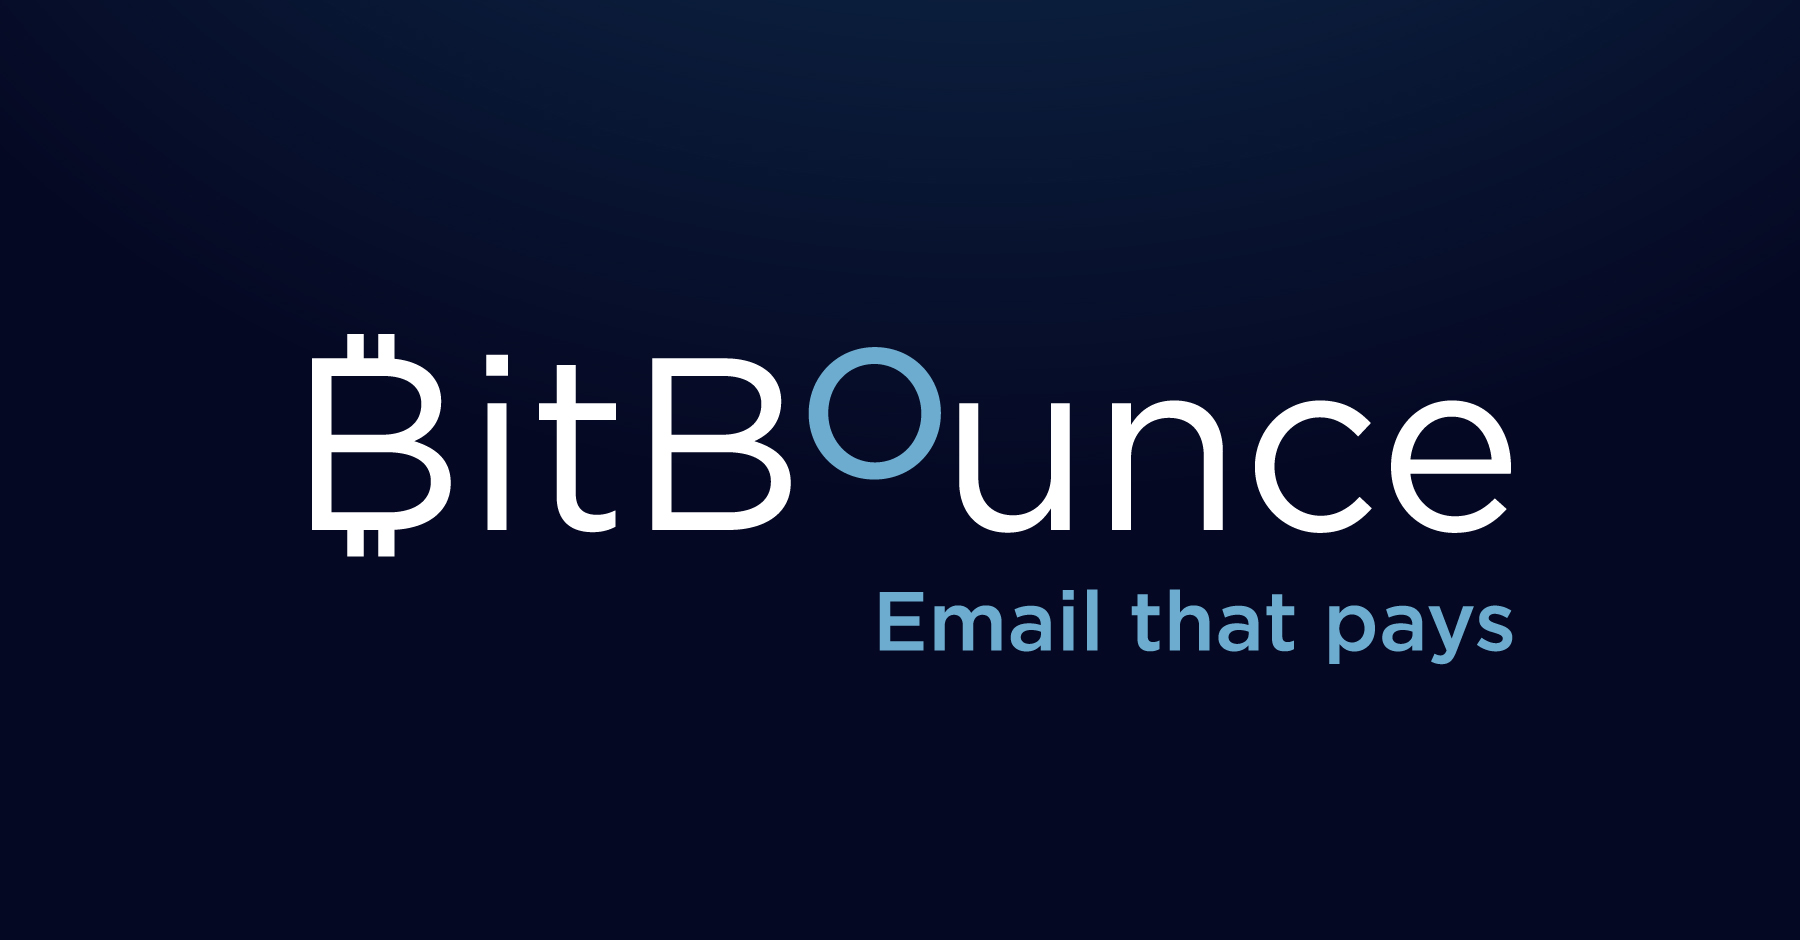 BitBounce, a Cryptocurrency Spam Solution, Announces One Billion Emails Processed